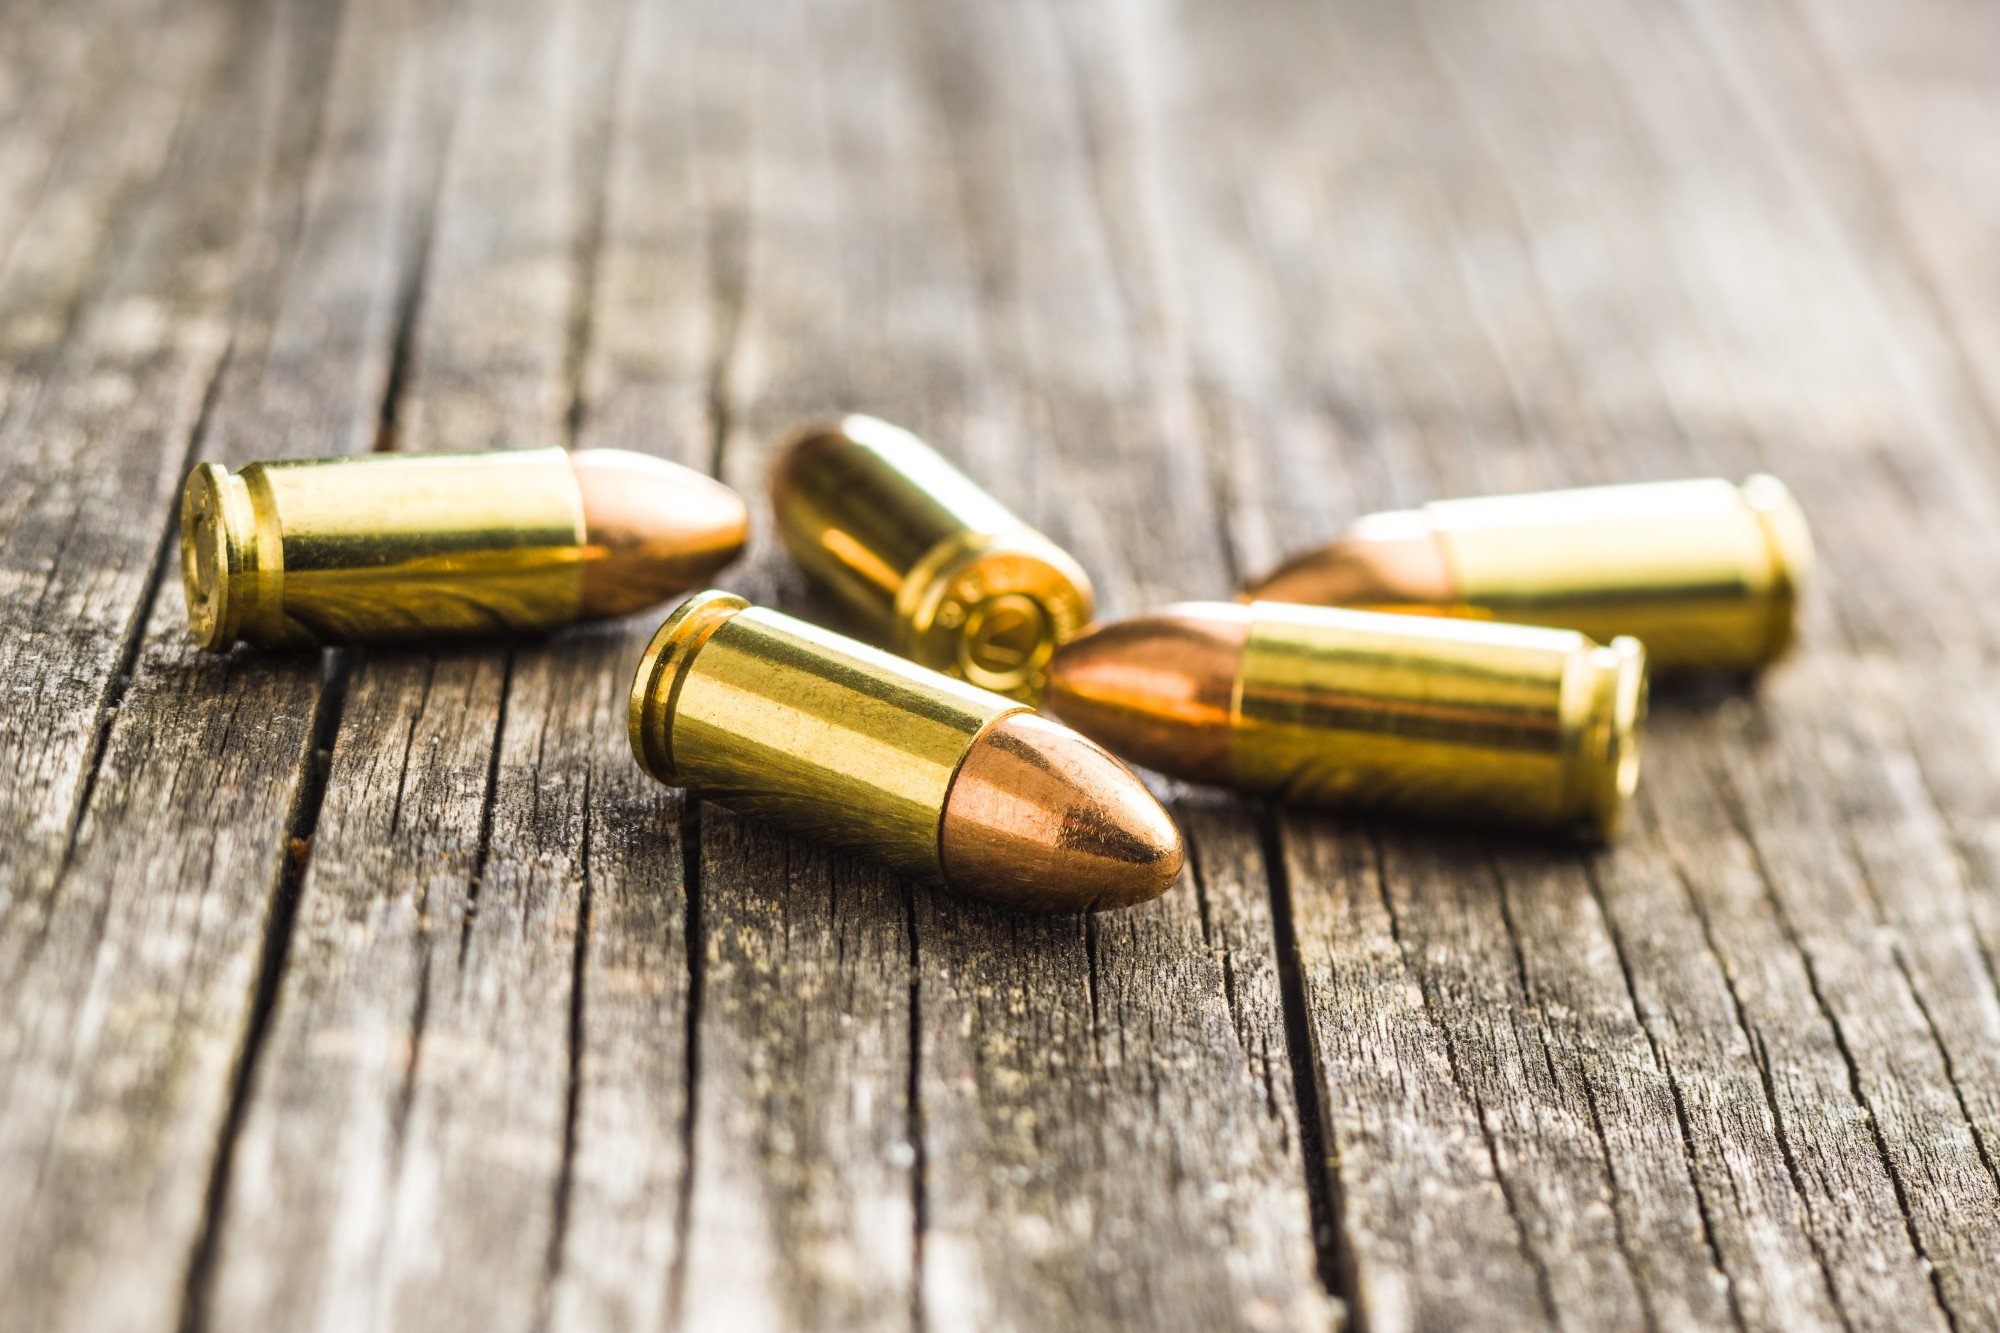 From Casing to Primer: A Breakdown of the Basic Parts of Ammunition